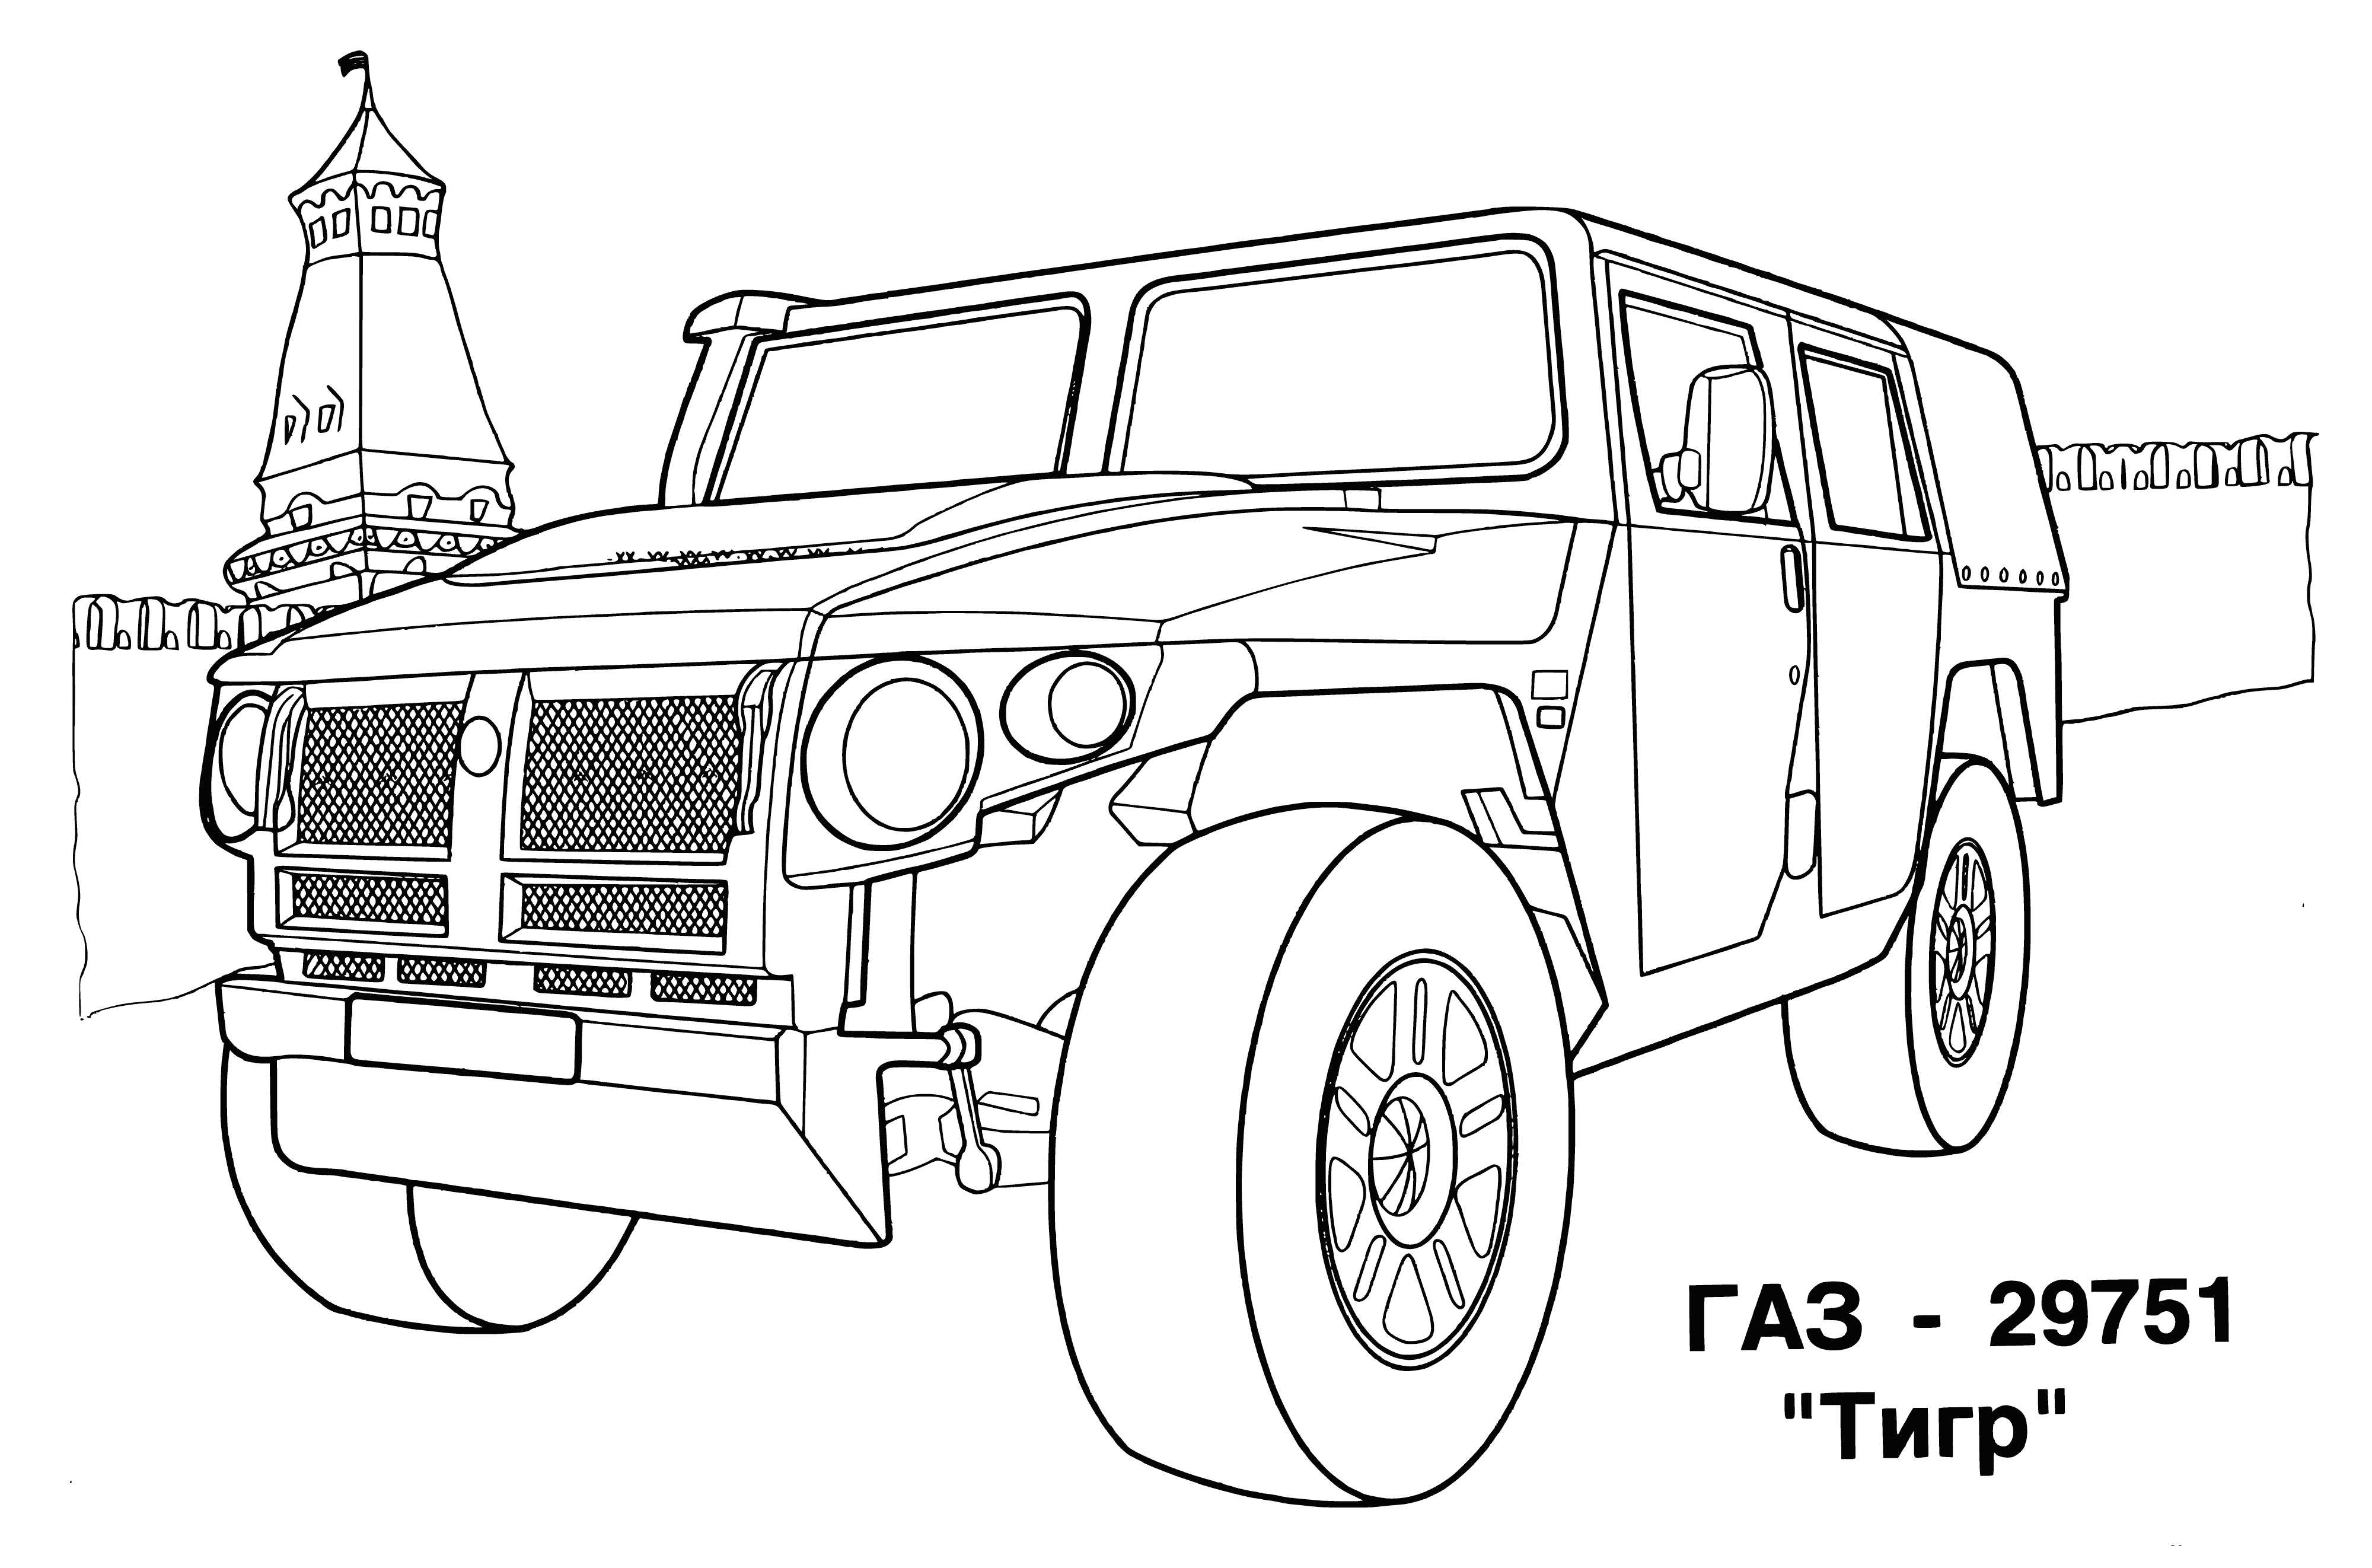 GAS coloring page